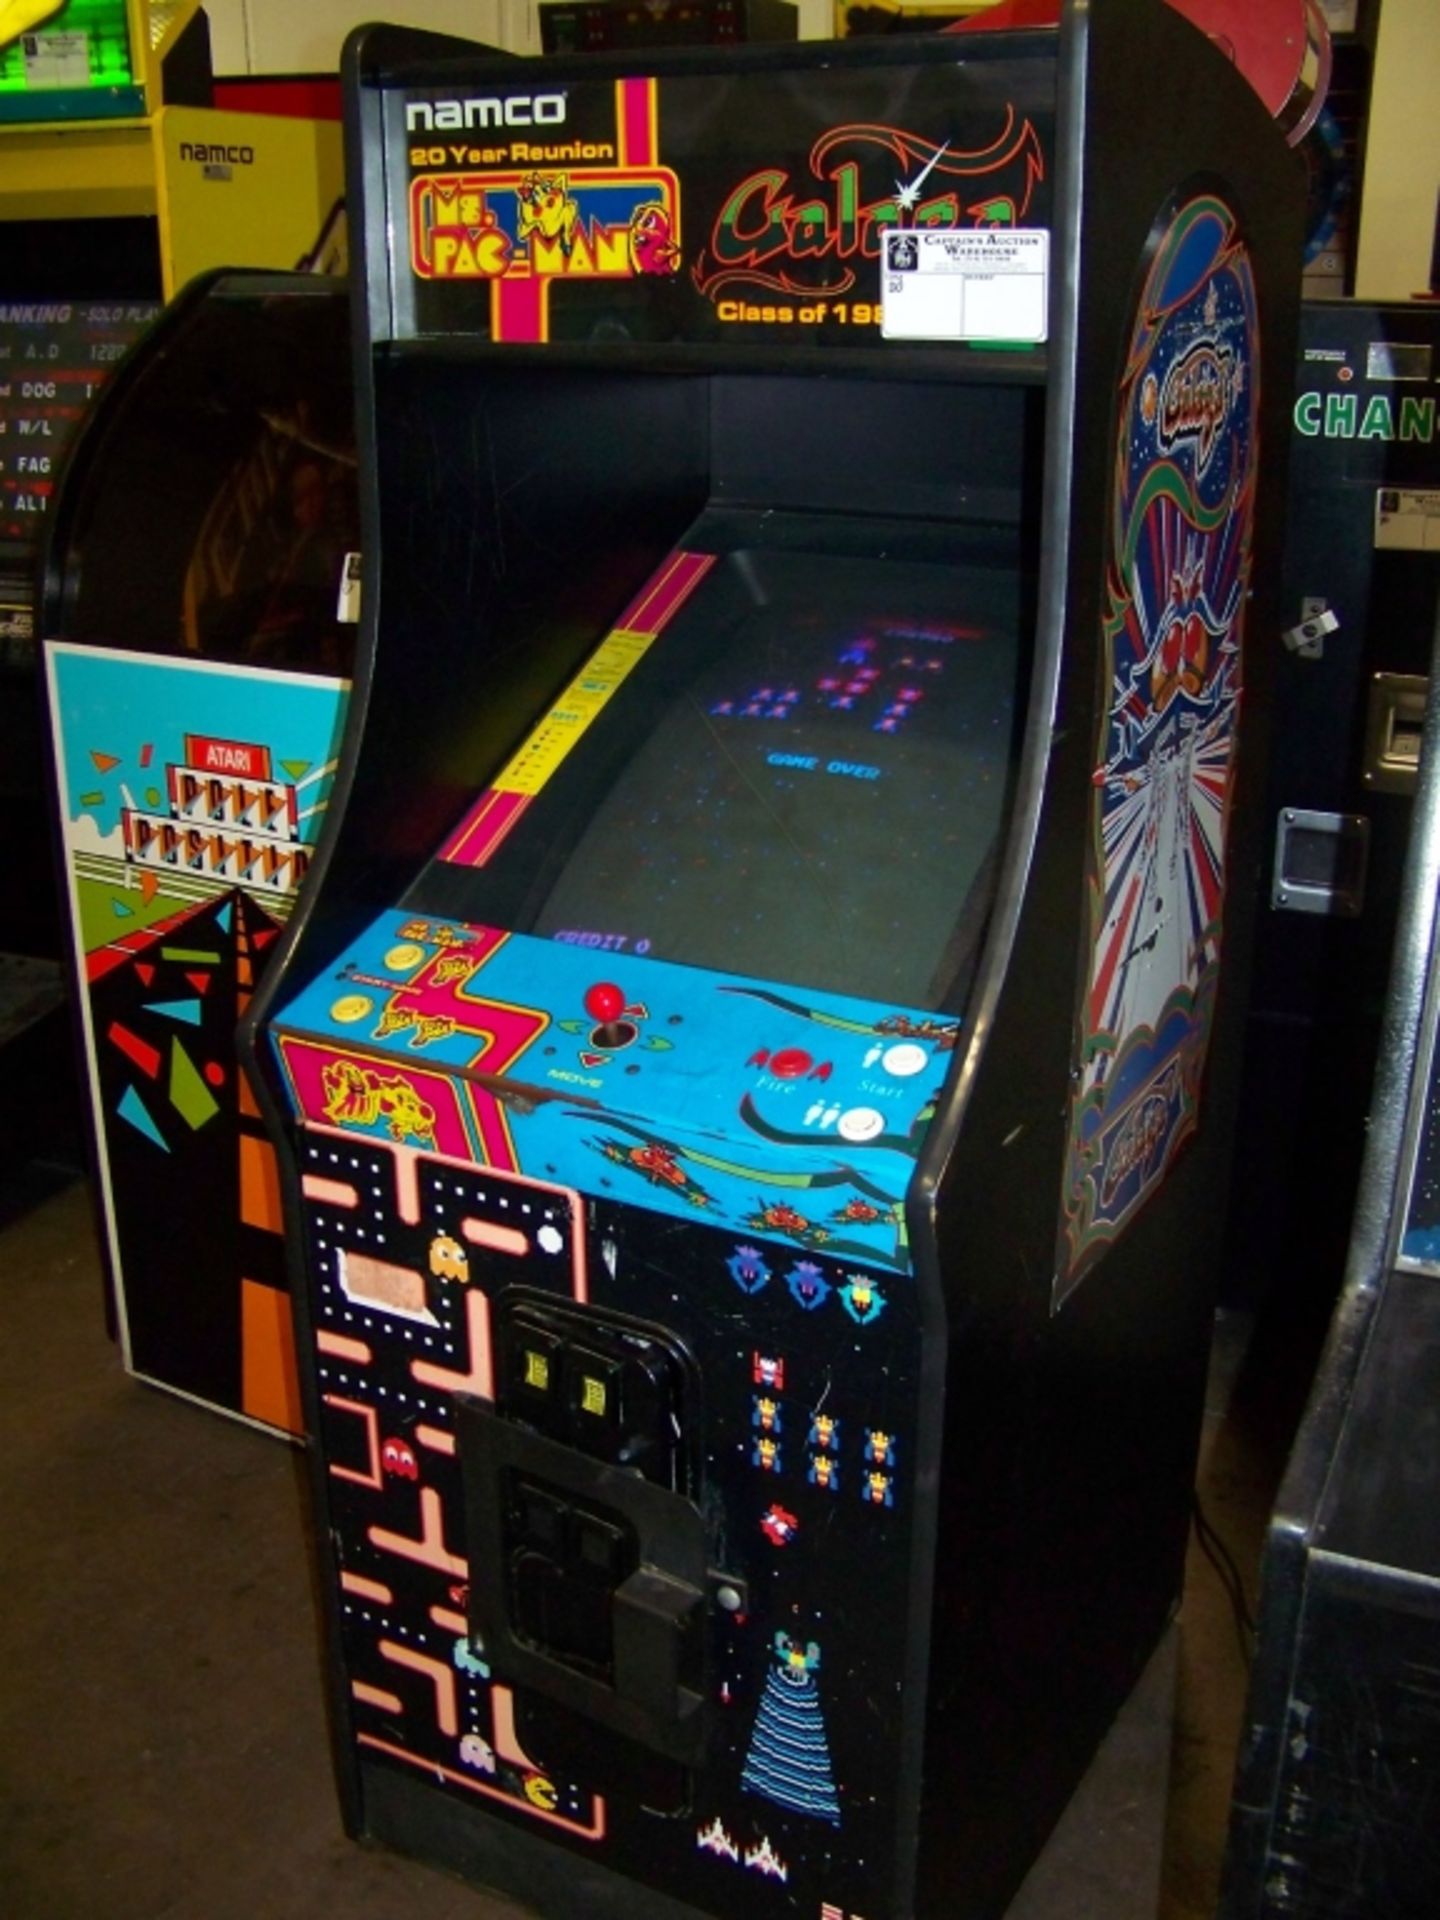 MS. PACMAN GALAGA CLASS OF 1981 ARCADE GAME - Image 3 of 5